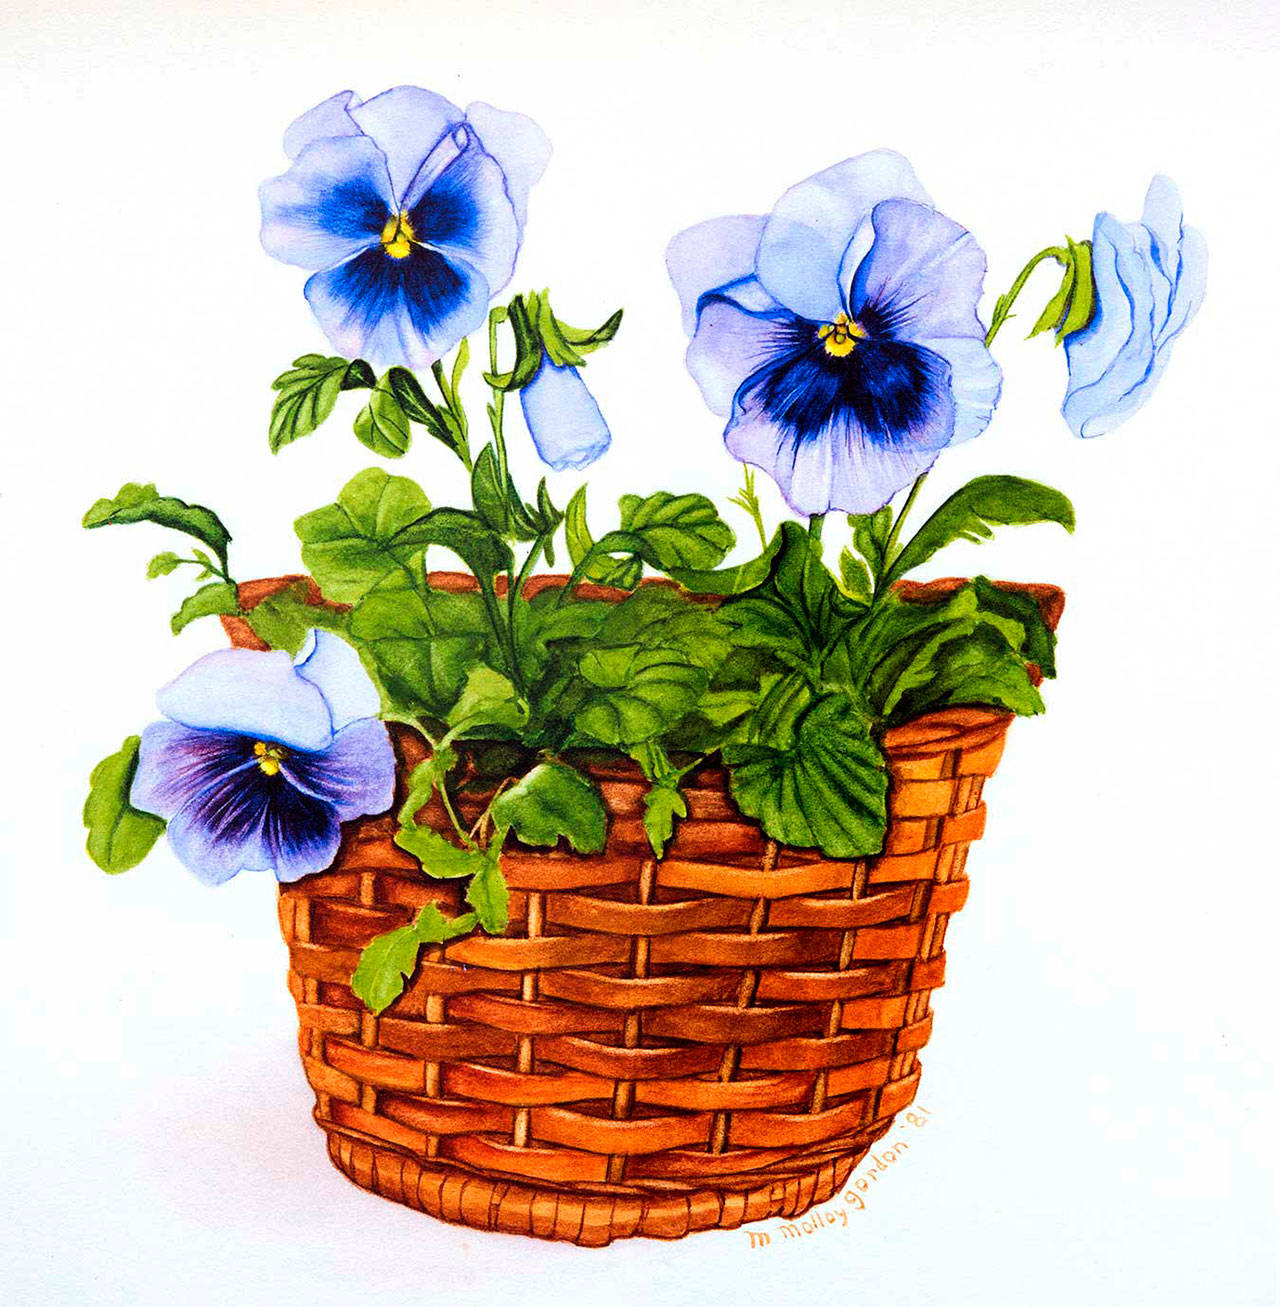 A painting of pansies done by Marcy Gordon will be shown at Gallery 9 during Gallery Walk in Port Townsend on Saturday.